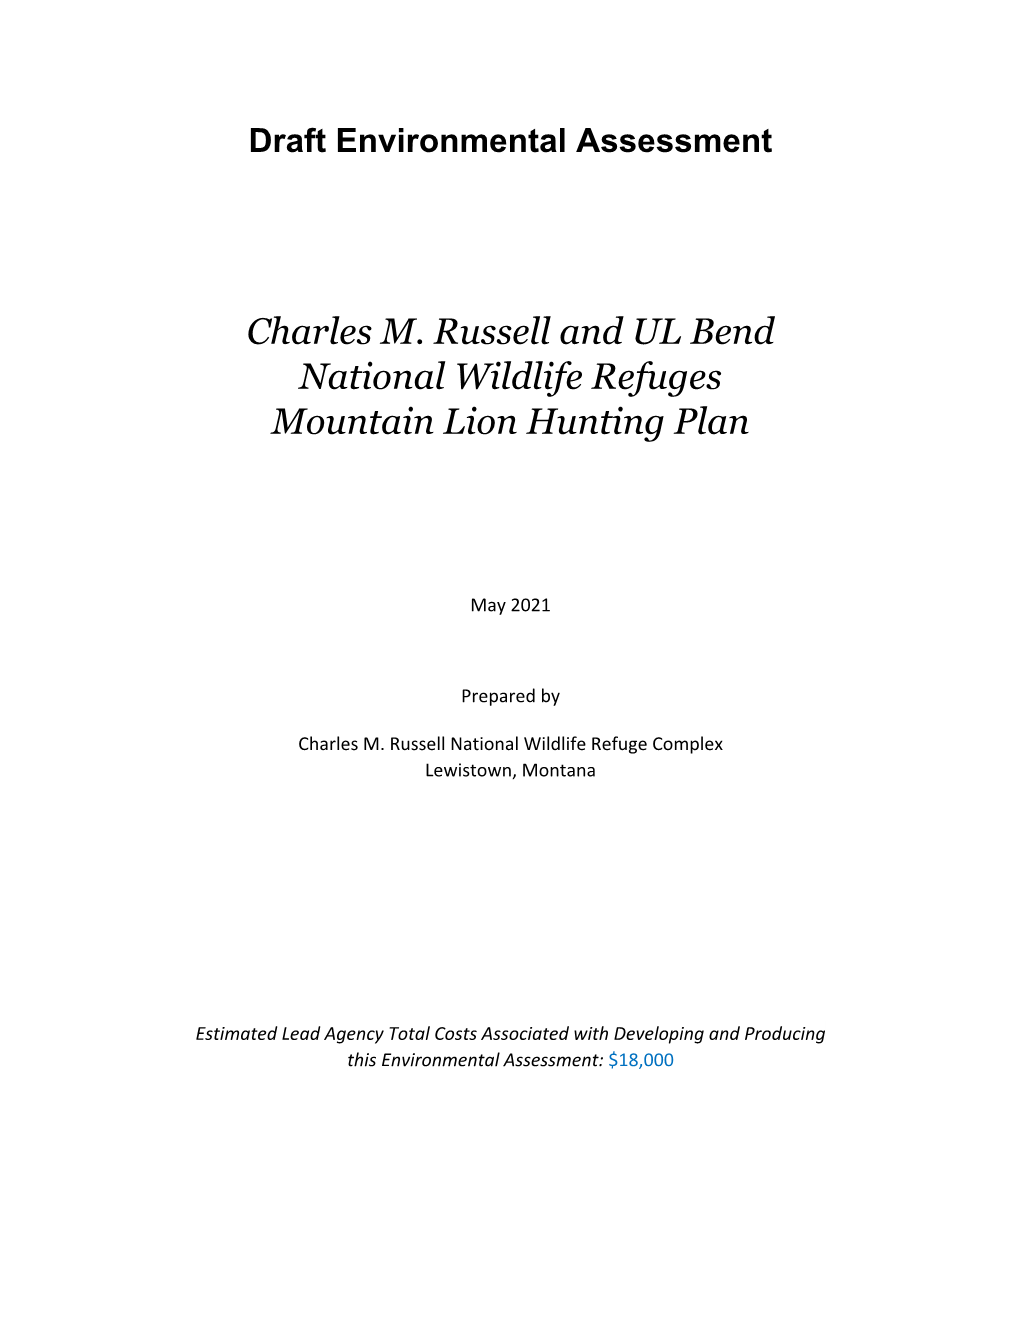 Charles M. Russell and UL Bend National Wildlife Refuges Mountain Lion Hunting Plan